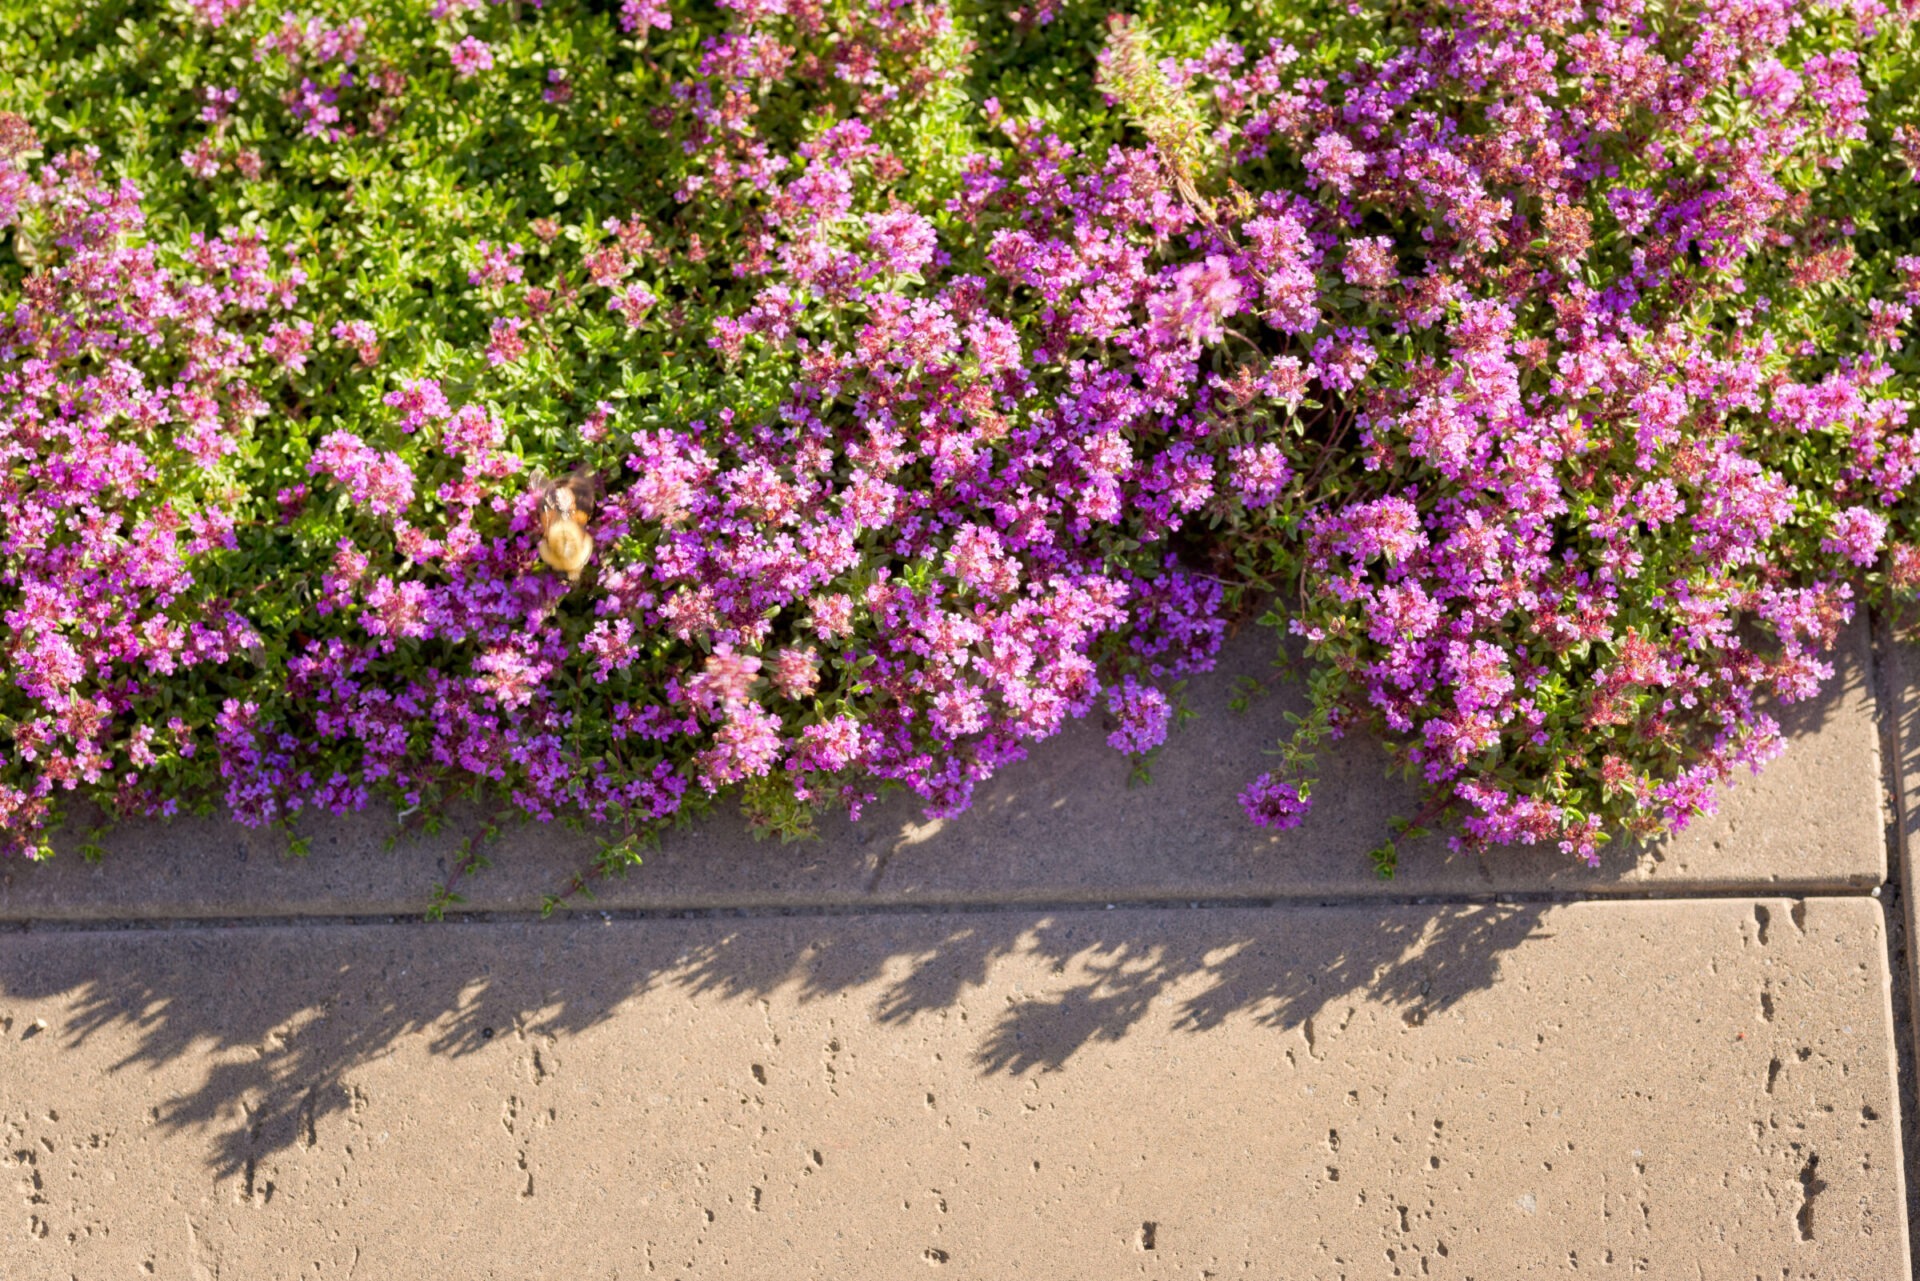 The image shows vibrant purple flowers spilling over onto a concrete sidewalk, casting shadows from the bright sunlight above.